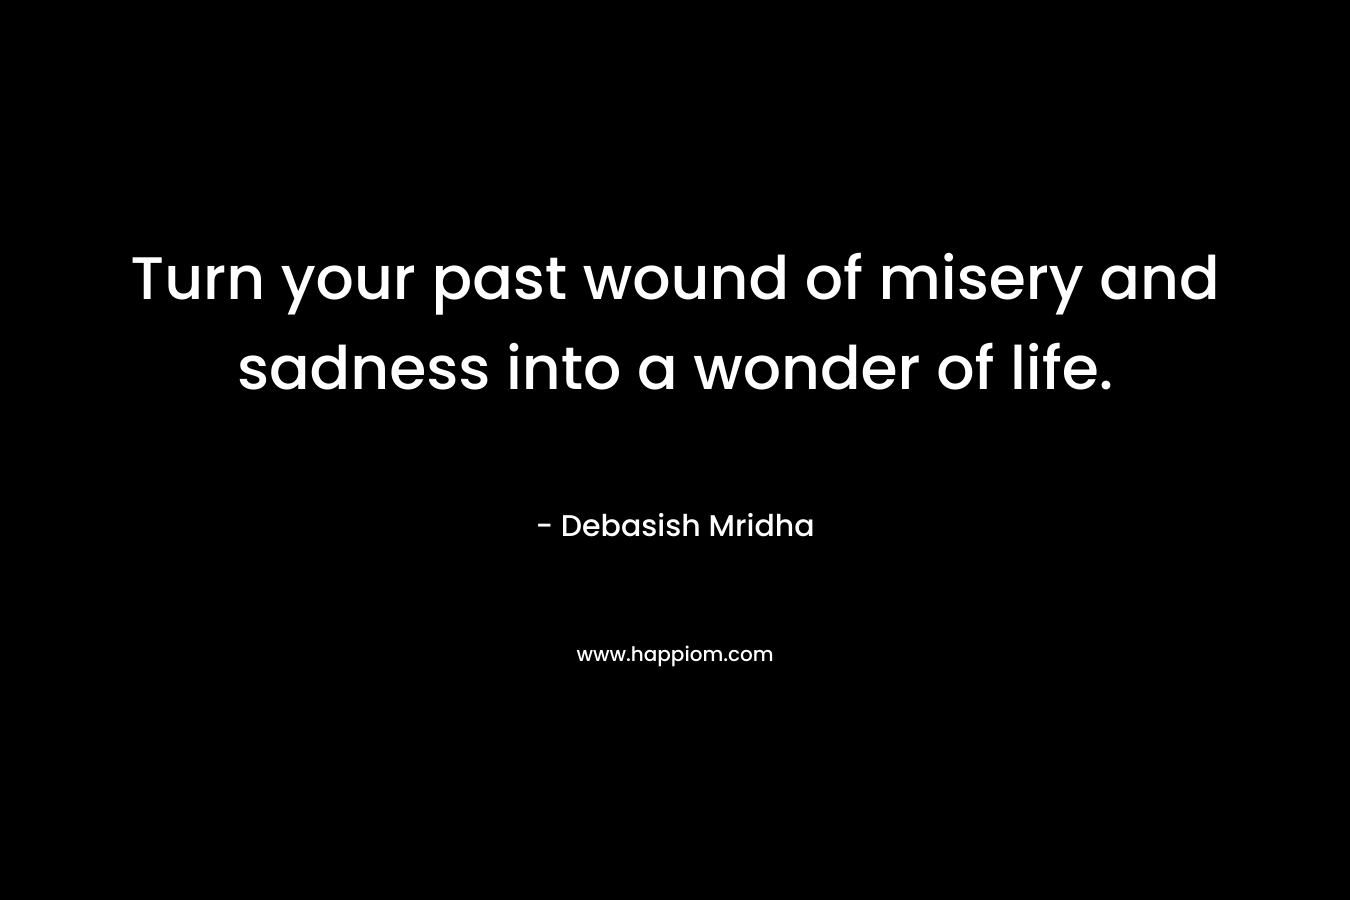 Turn your past wound of misery and sadness into a wonder of life.